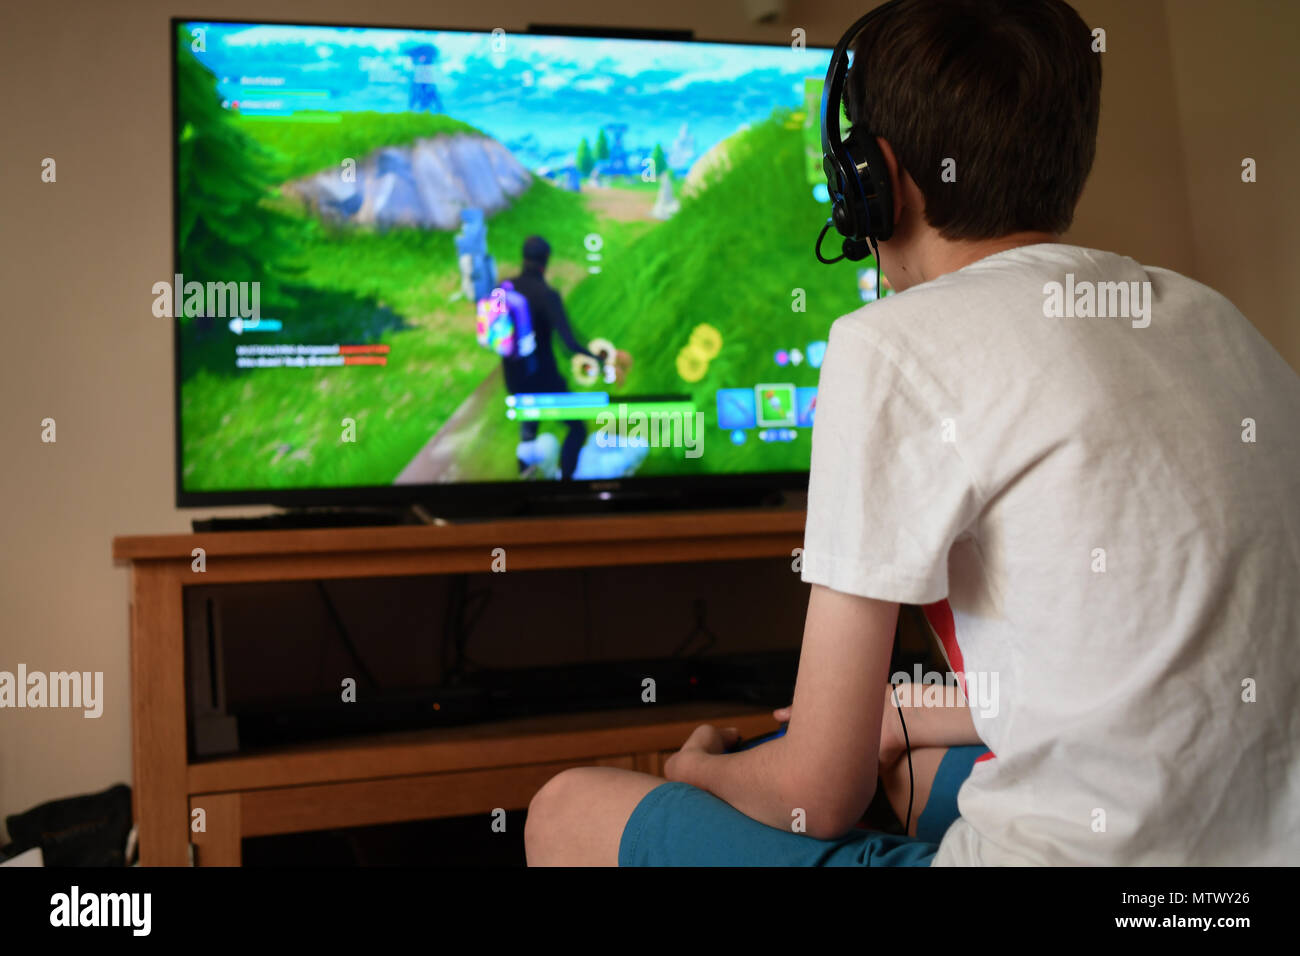 A teenage boy AGE 13plays Fortnite computer game on the PS4 using a headset to communicate with other players in his squad. Stock Photo